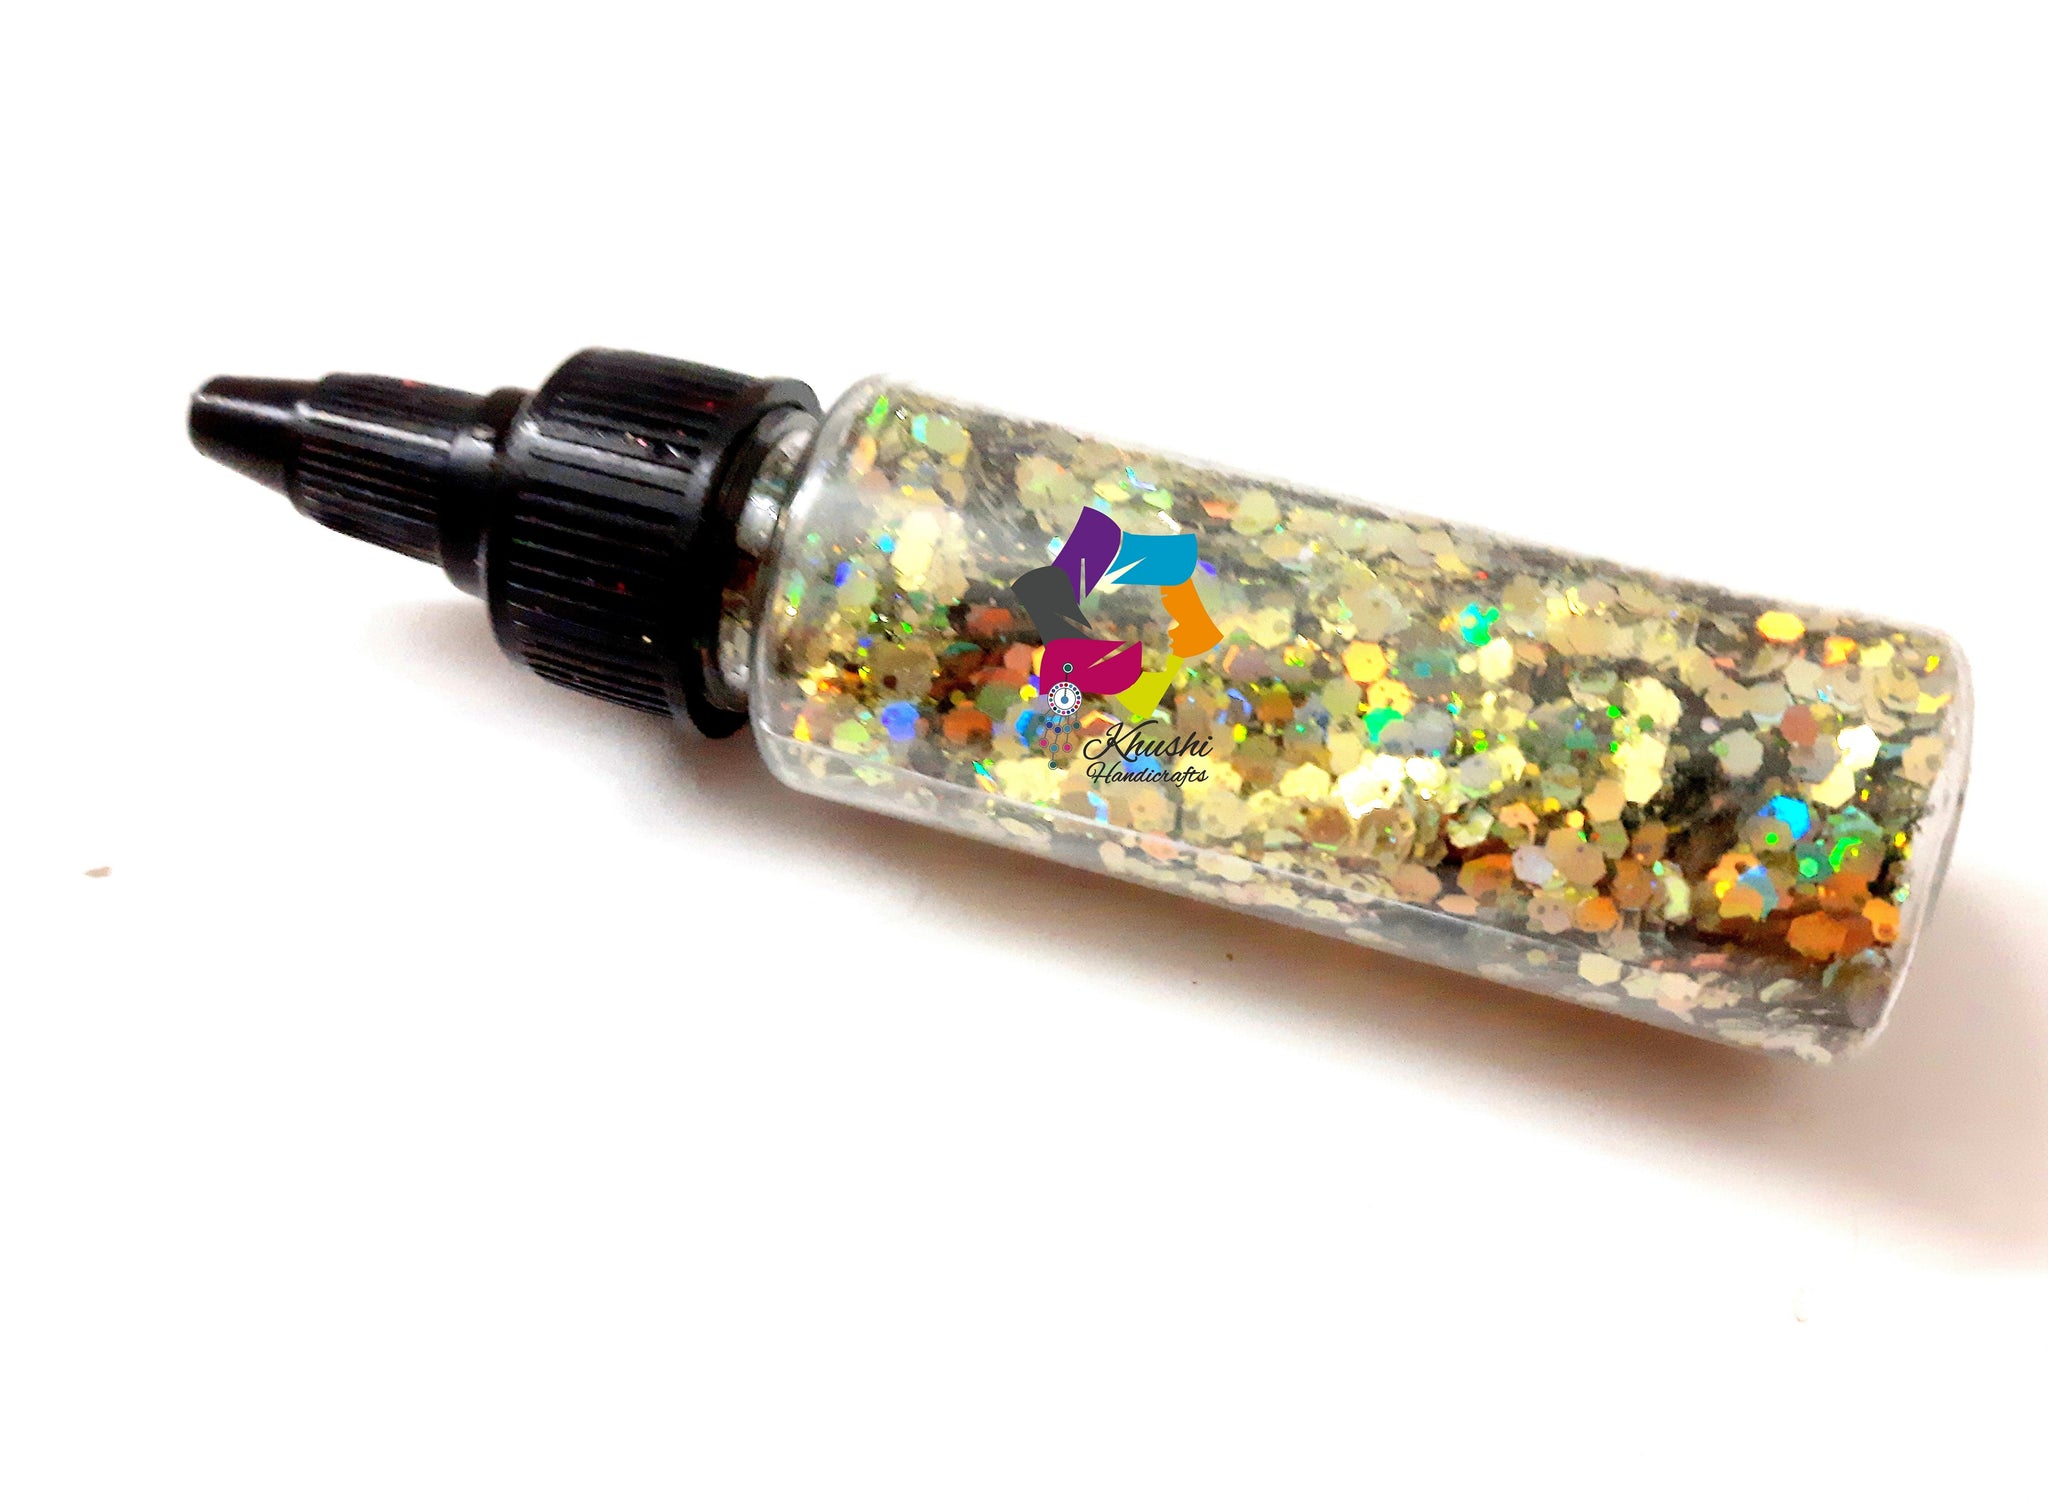 Wine Gold Holographic Glitter Powder Mixture for resin crafts!